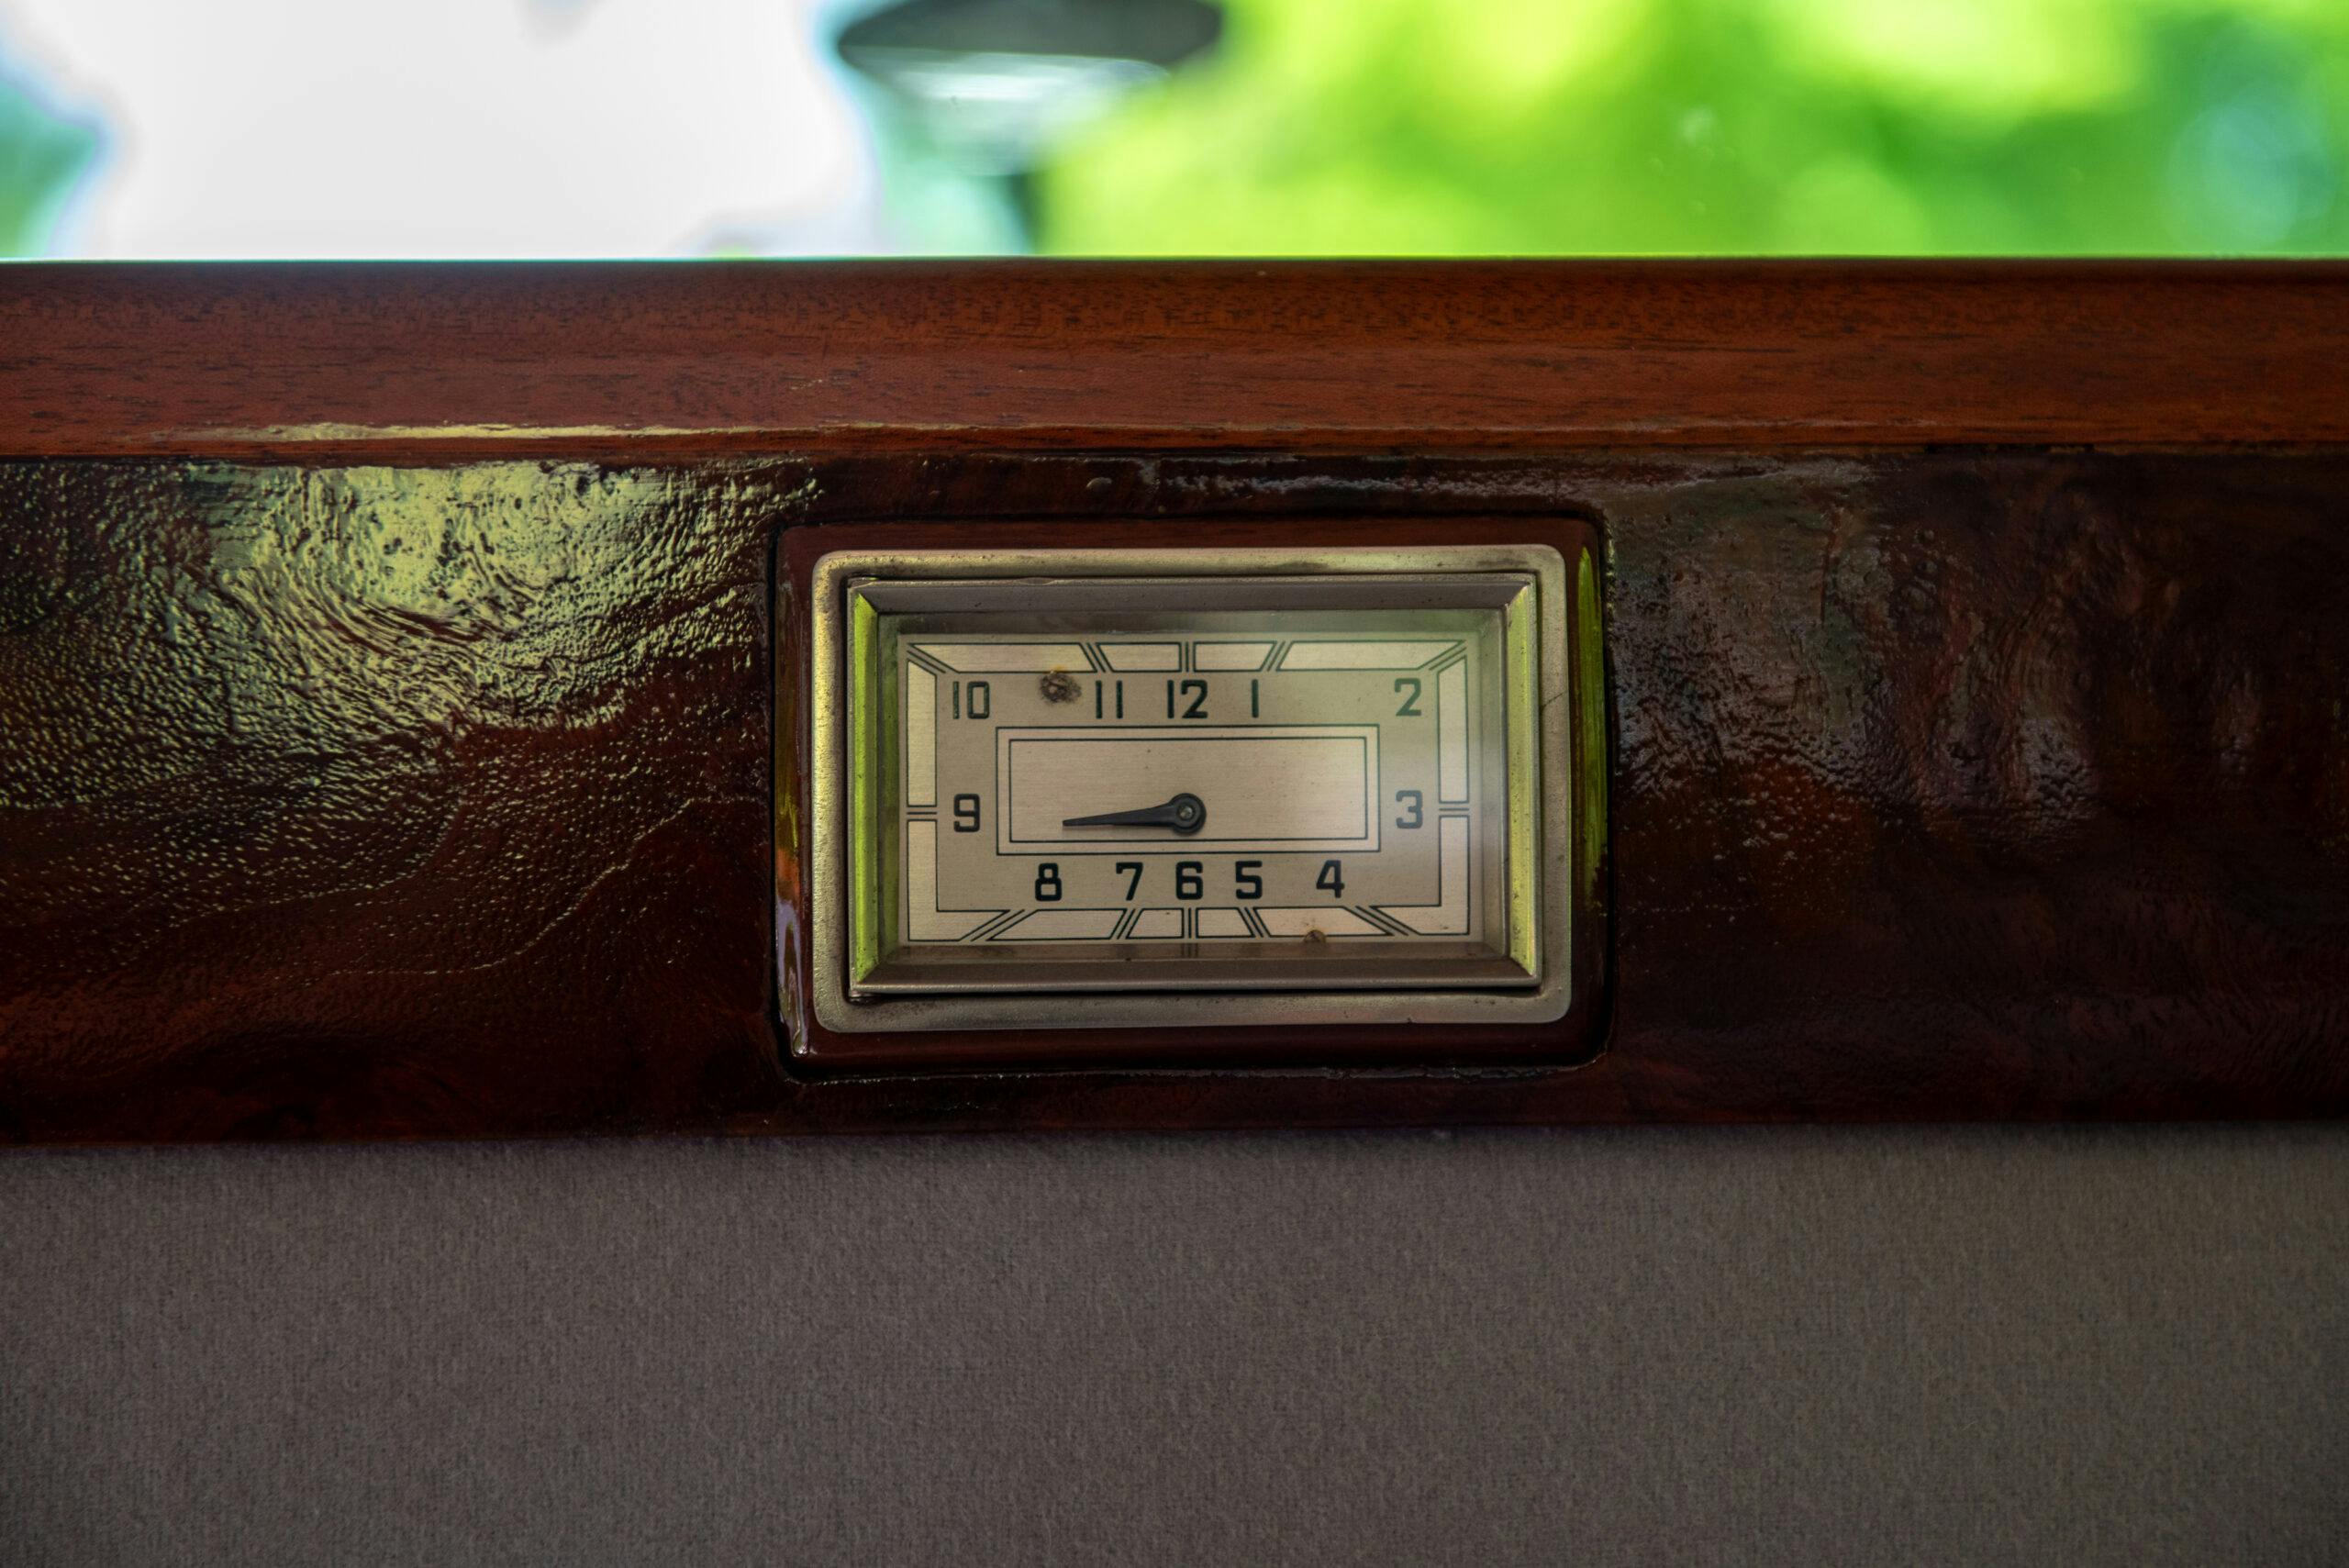 1941 Packard Super Eight One-Eighty Limo clock